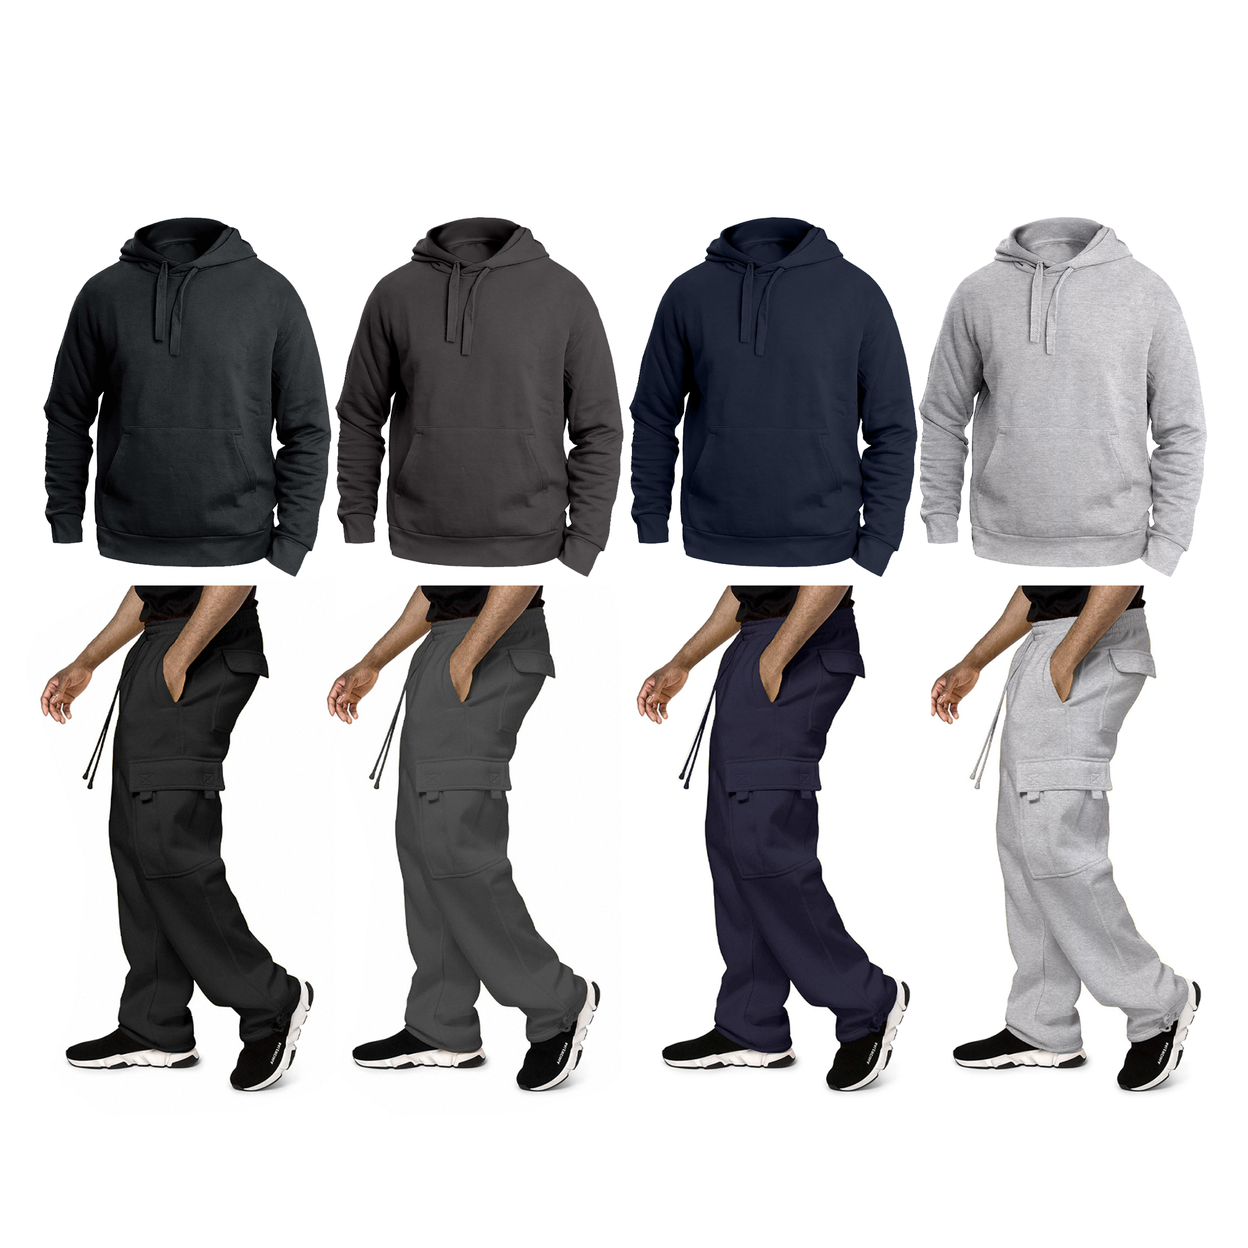 2-Pack: Men's Big & Tall Winter Warm Cozy Athletic Fleece Lined Multi-Pocket Cargo Sweatsuit - Charcoal, X-large